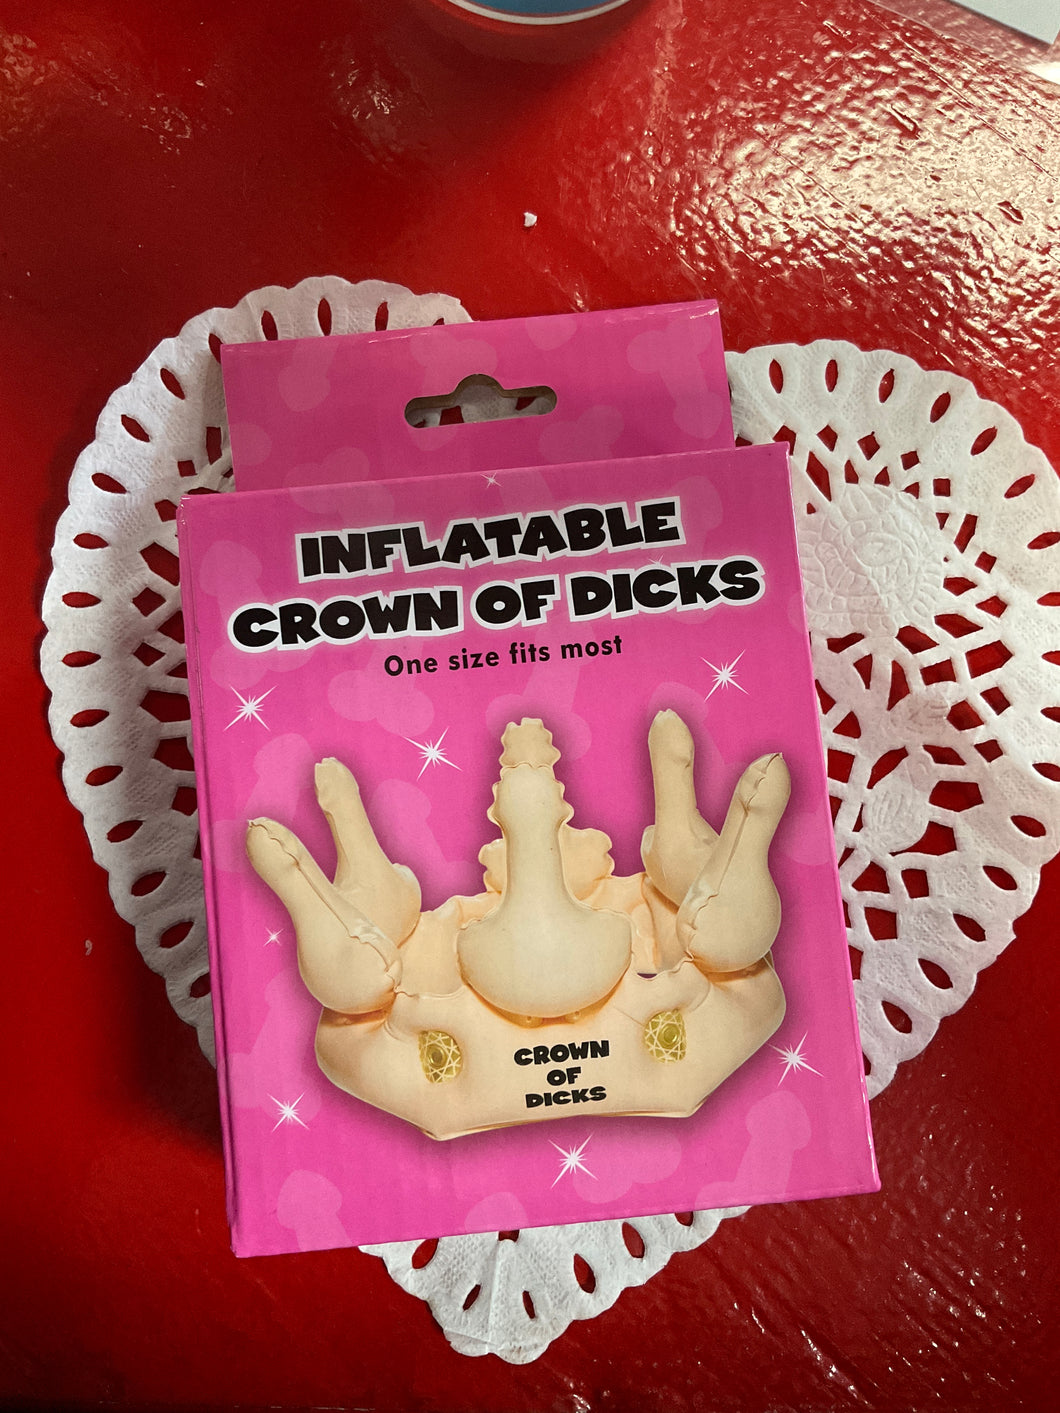 Inflatable crown of dicks